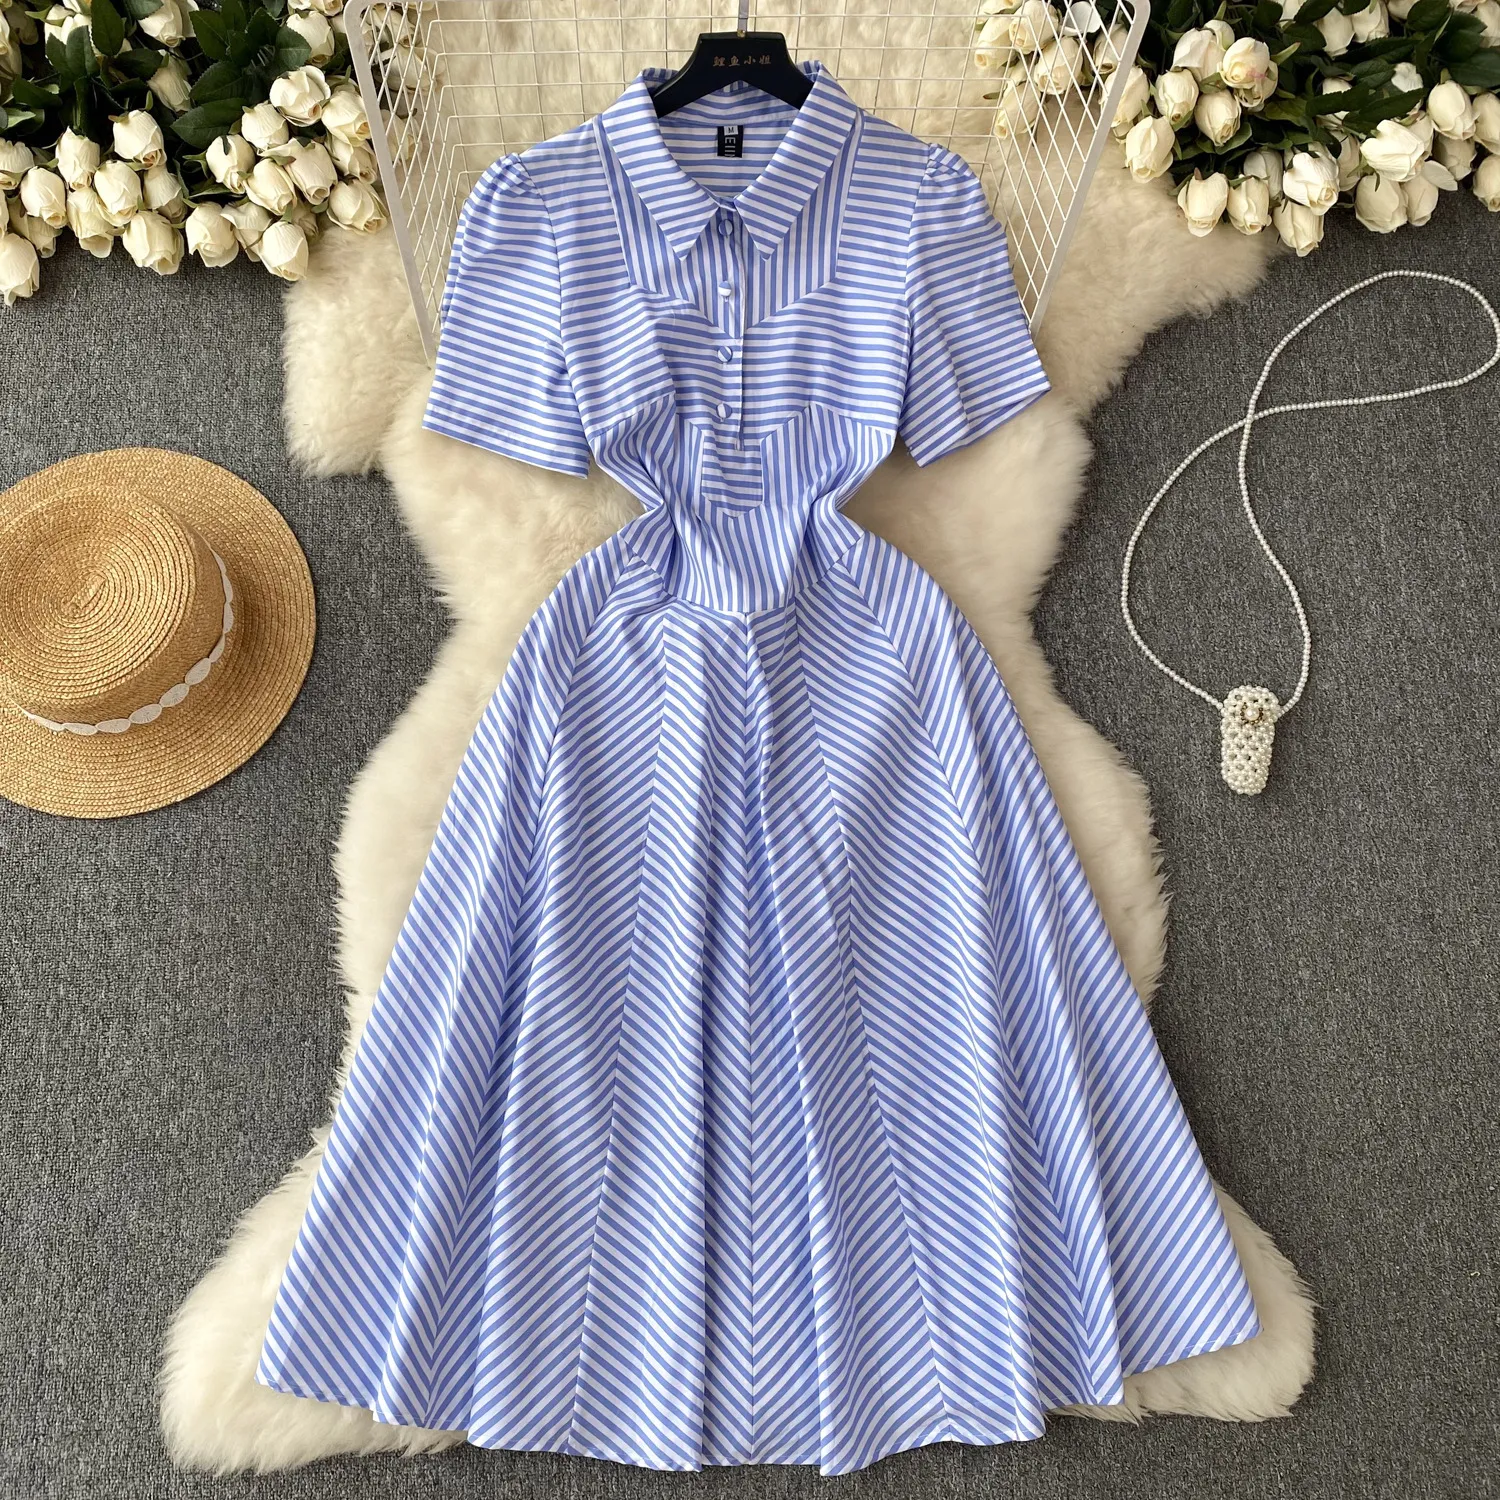 Korean version of chic fashionable retro lapel, bubble sleeve striped dress for women with waist up and slim hem, A-line long skirt